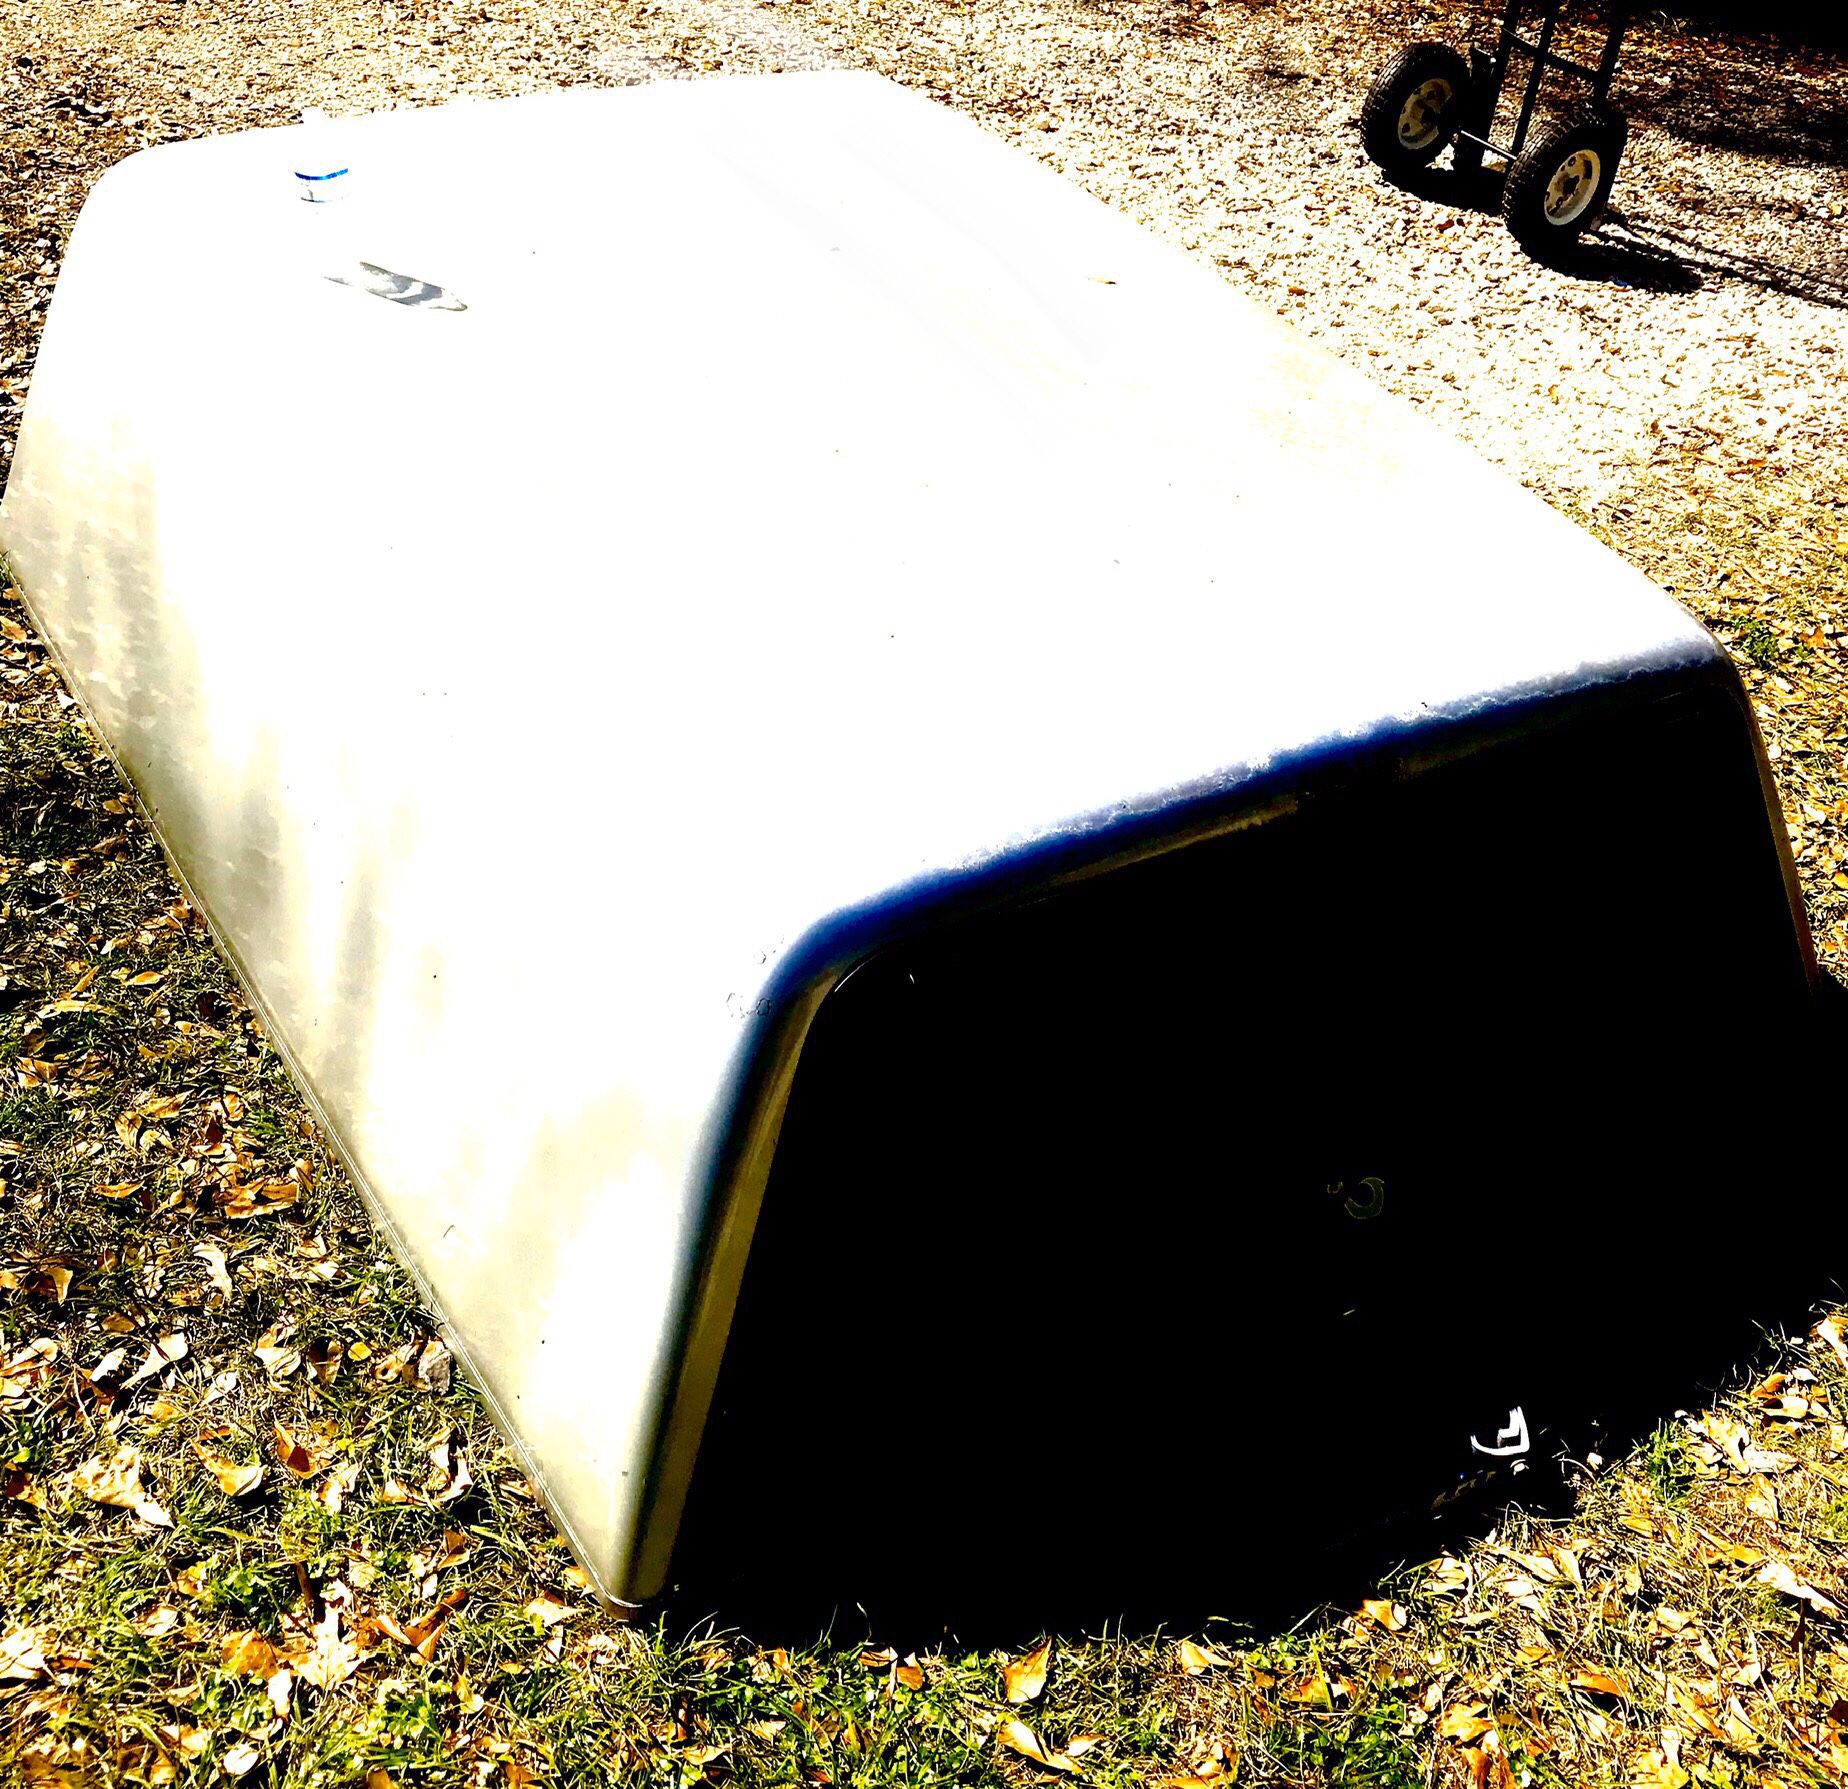 $100 SNUGTOP (style) CAMPER SHELL 78” Long